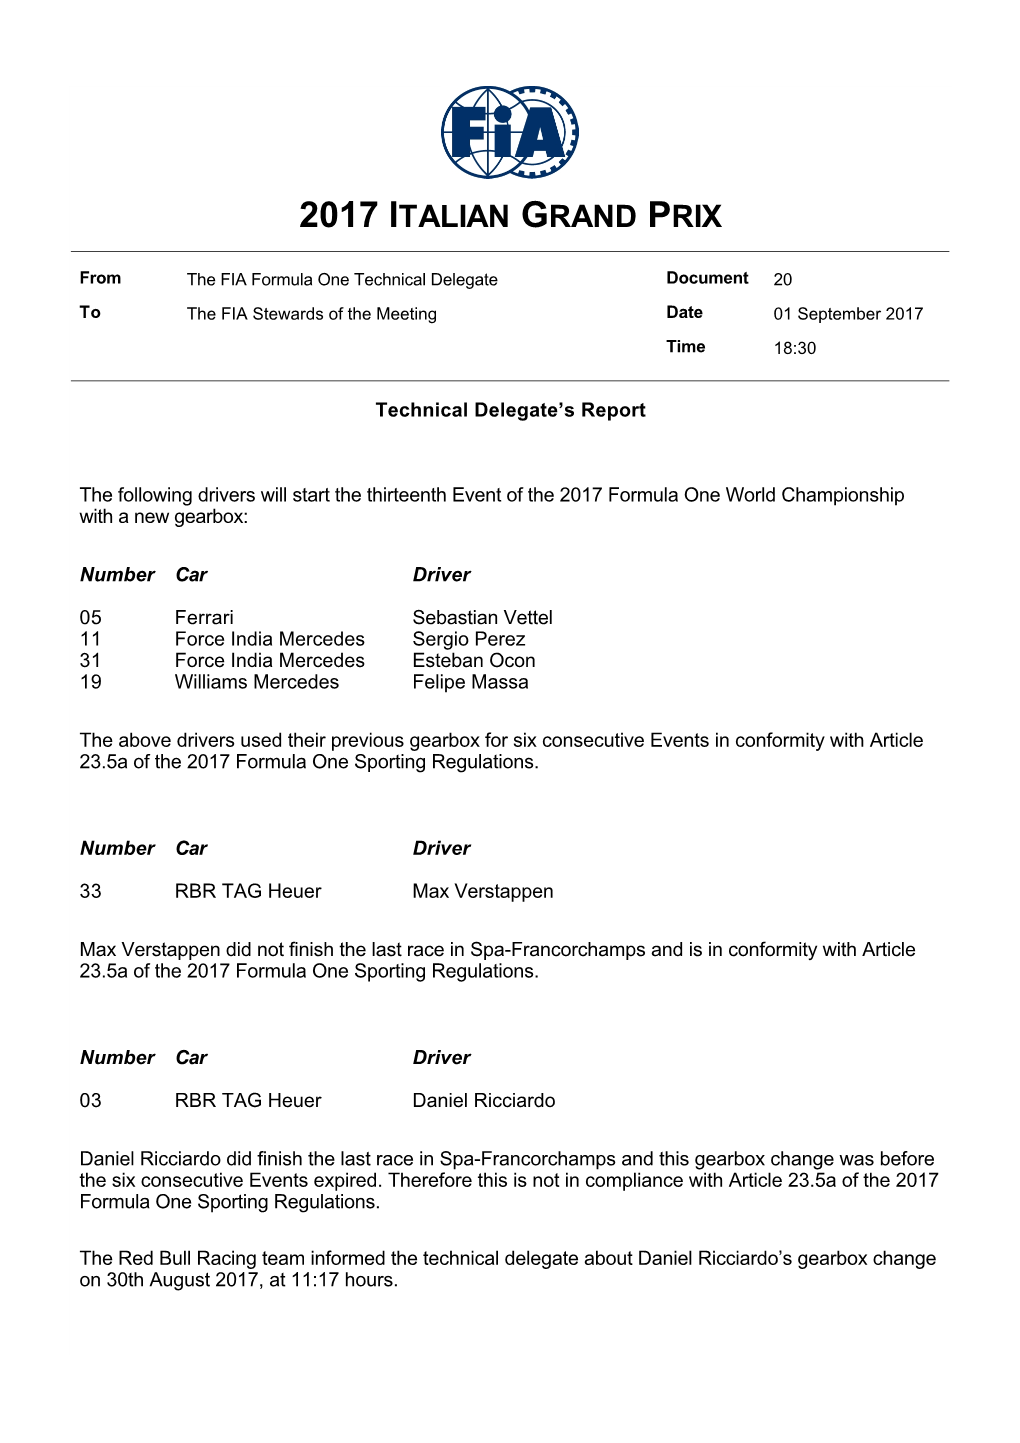 Document 20 to the FIA Stewards of the Meeting Date 01 September 2017 Time 18:30